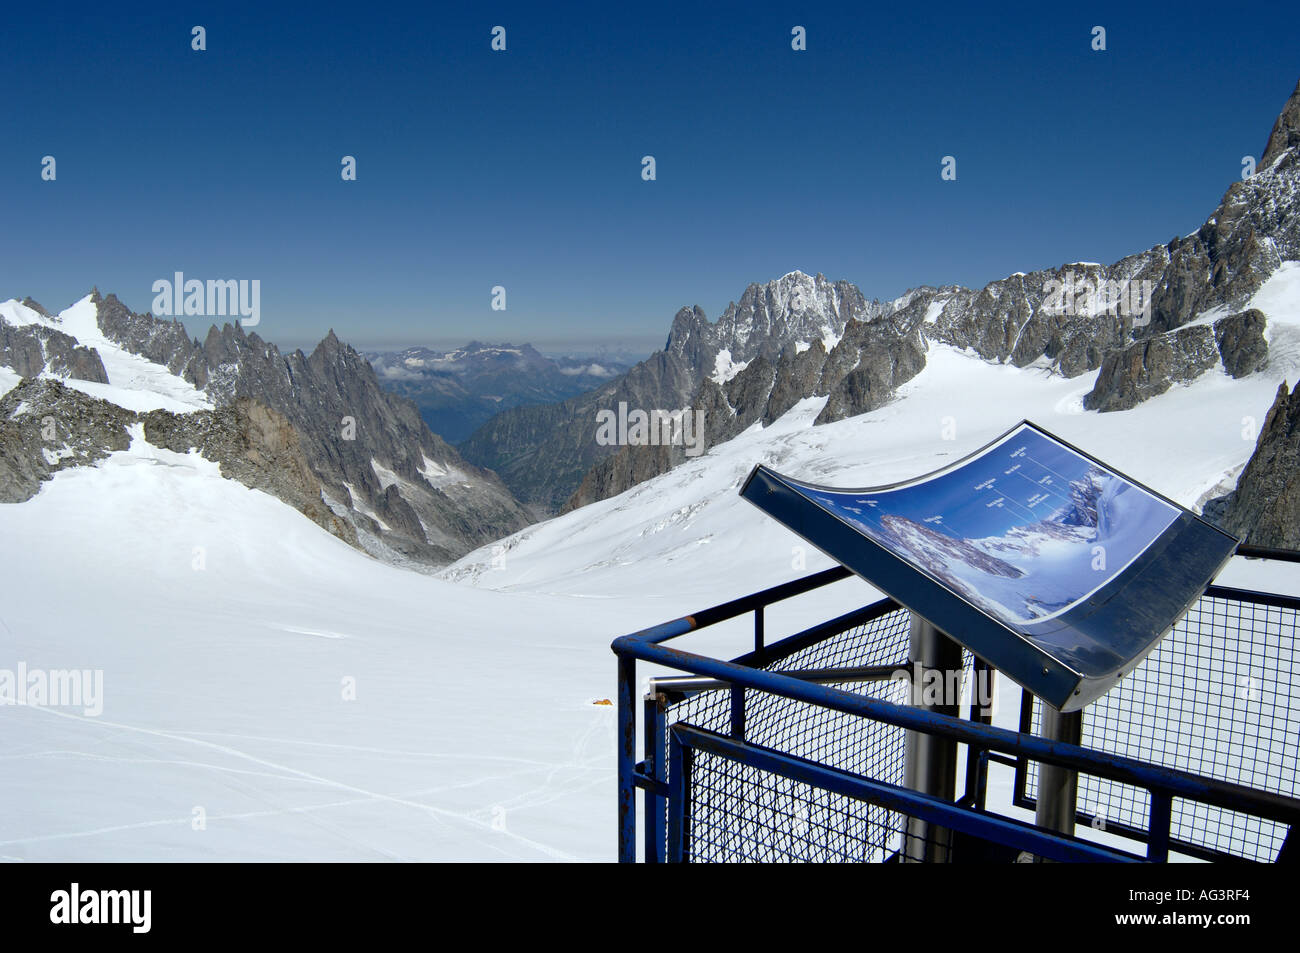 Viewing map at pointe helbronner cablecar station on the italian side of the mont blanc massif overlooking the glacier du geant Stock Photo